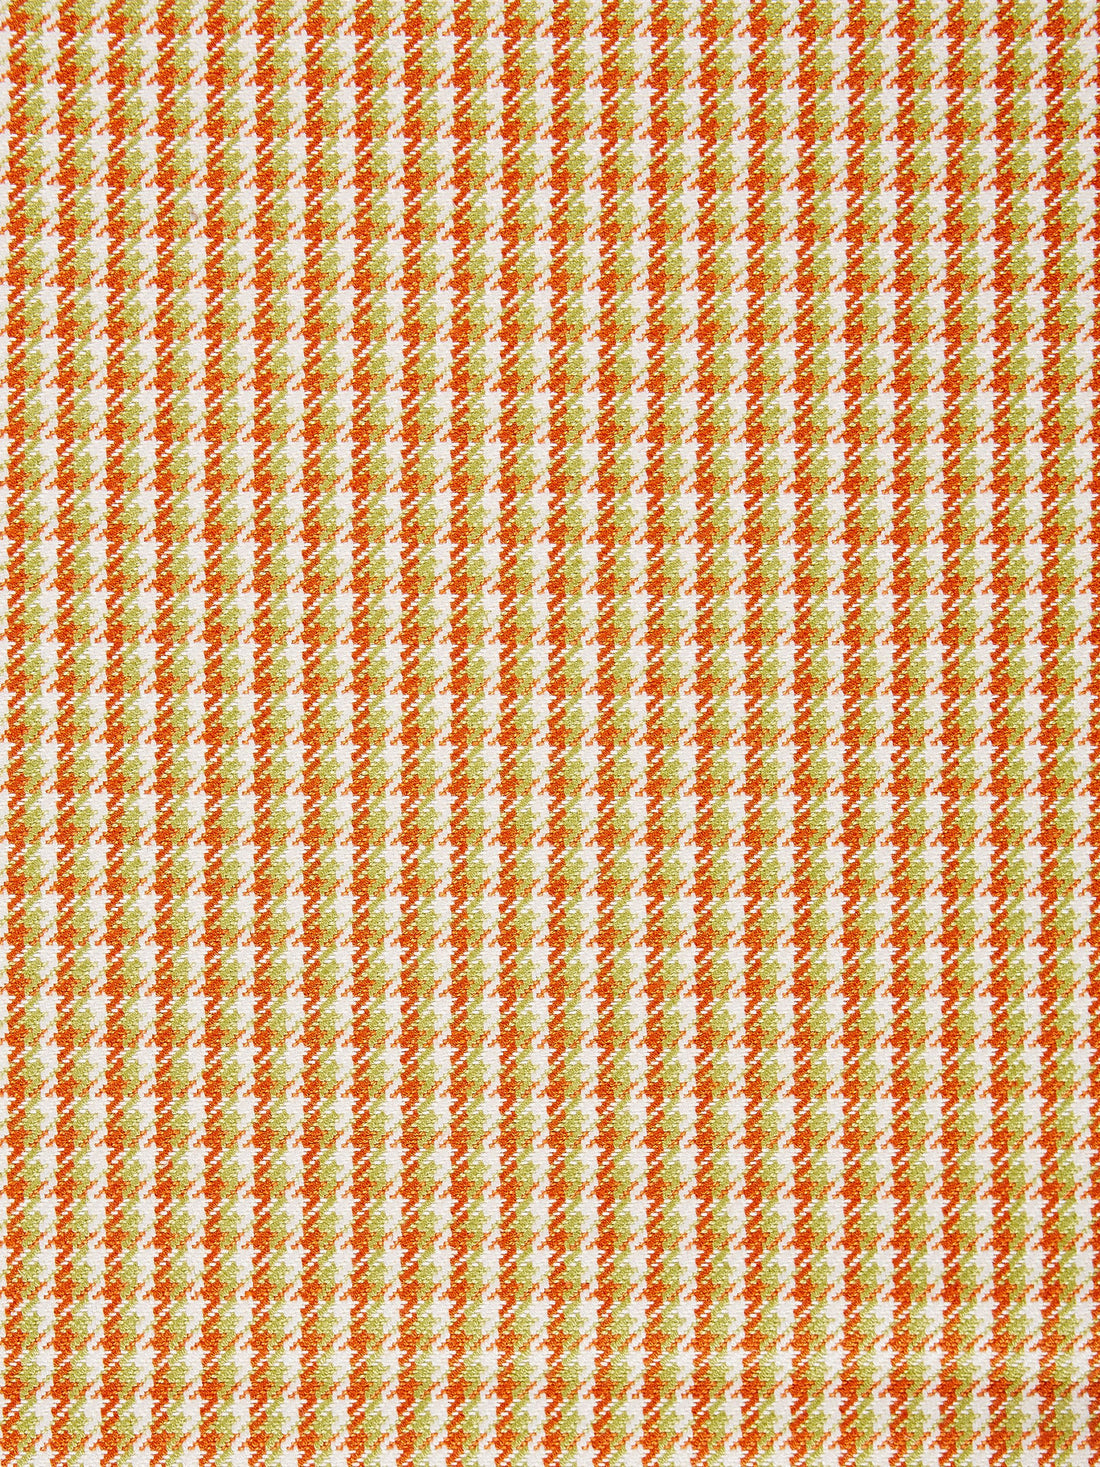 Tattersall Check fabric in mango color - pattern number SC 000327013 - by Scalamandre in the Scalamandre Fabrics Book 1 collection